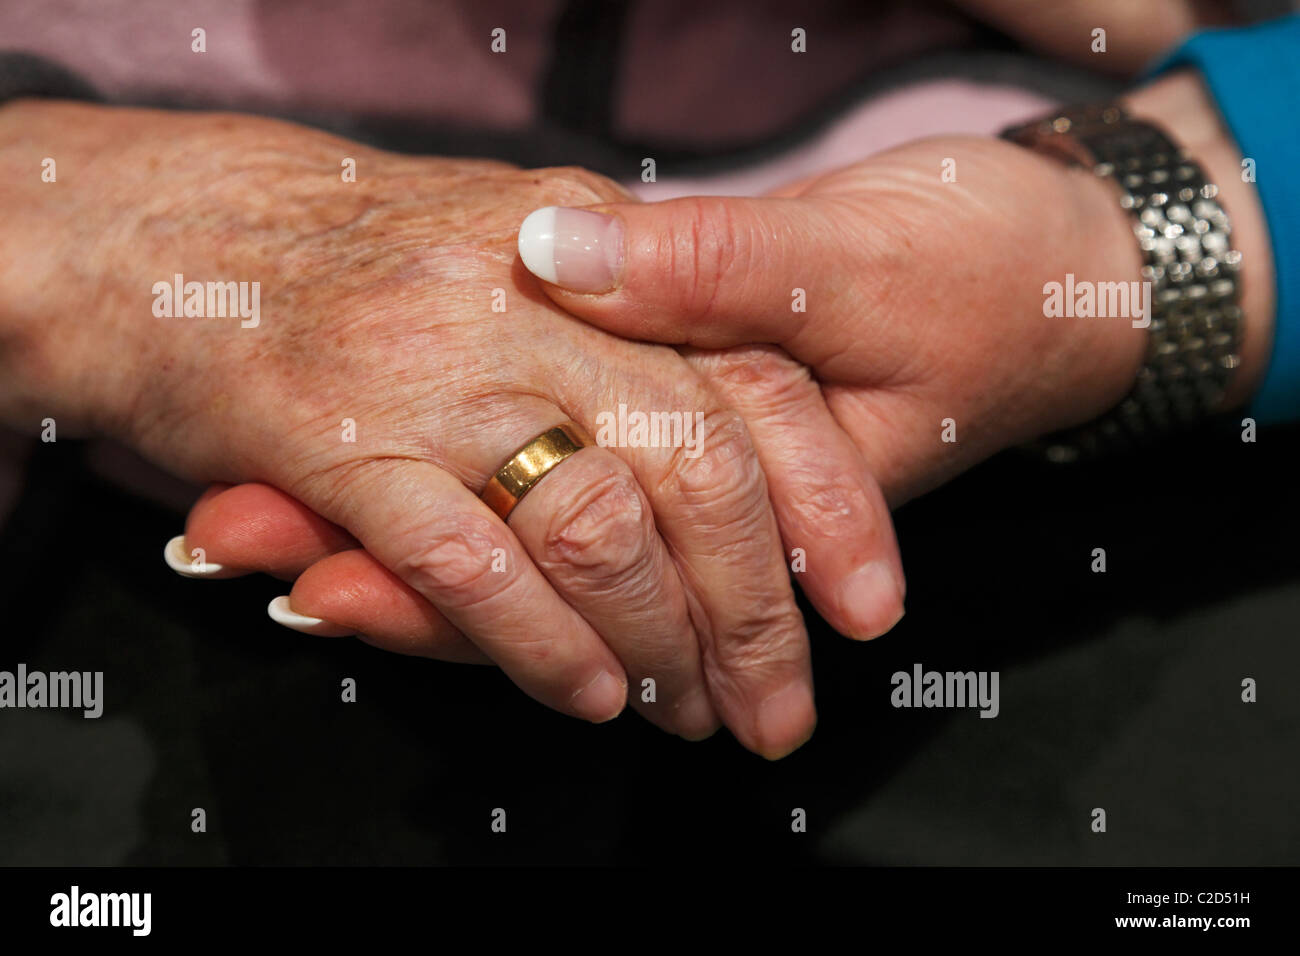 people, old age, retirement home, Altenzentrum der St. Clemens Hospitale in Sterkrade, a nurse holds the hand of an older woman, close-up, Waltraut, Elke, D-Oberhausen, Ruhr area, Lower Rhine, North Rhine-Westphalia, NRW, D-Oberhausen-Sterkrade Stock Photo